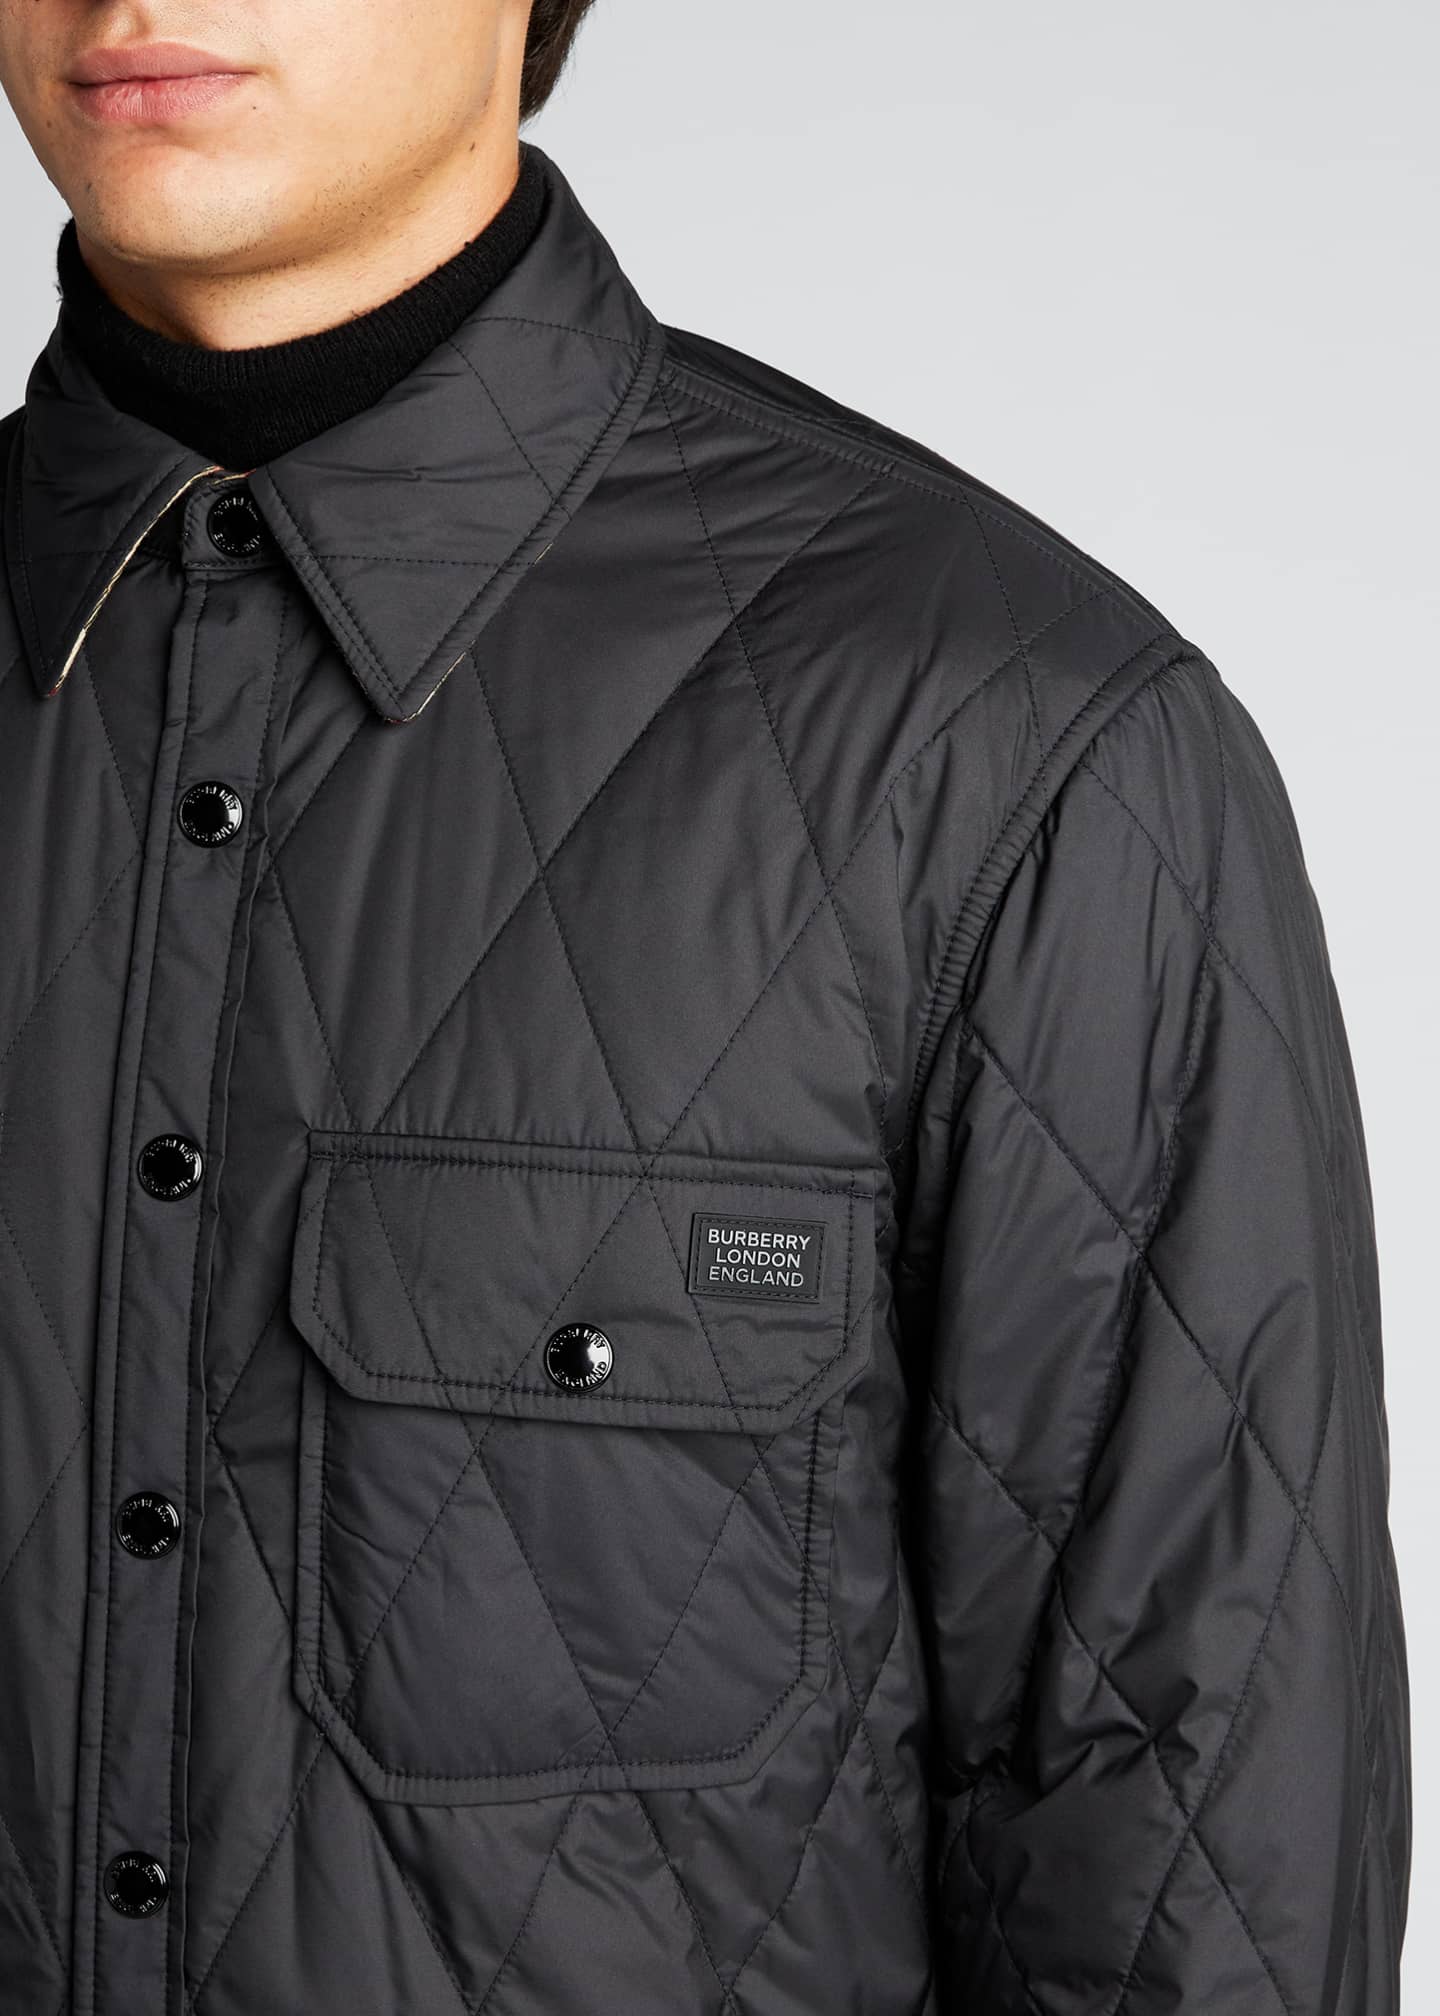 Burberry Men's Cresswell Reversible Diamond Quilted Shirt Jacket ...